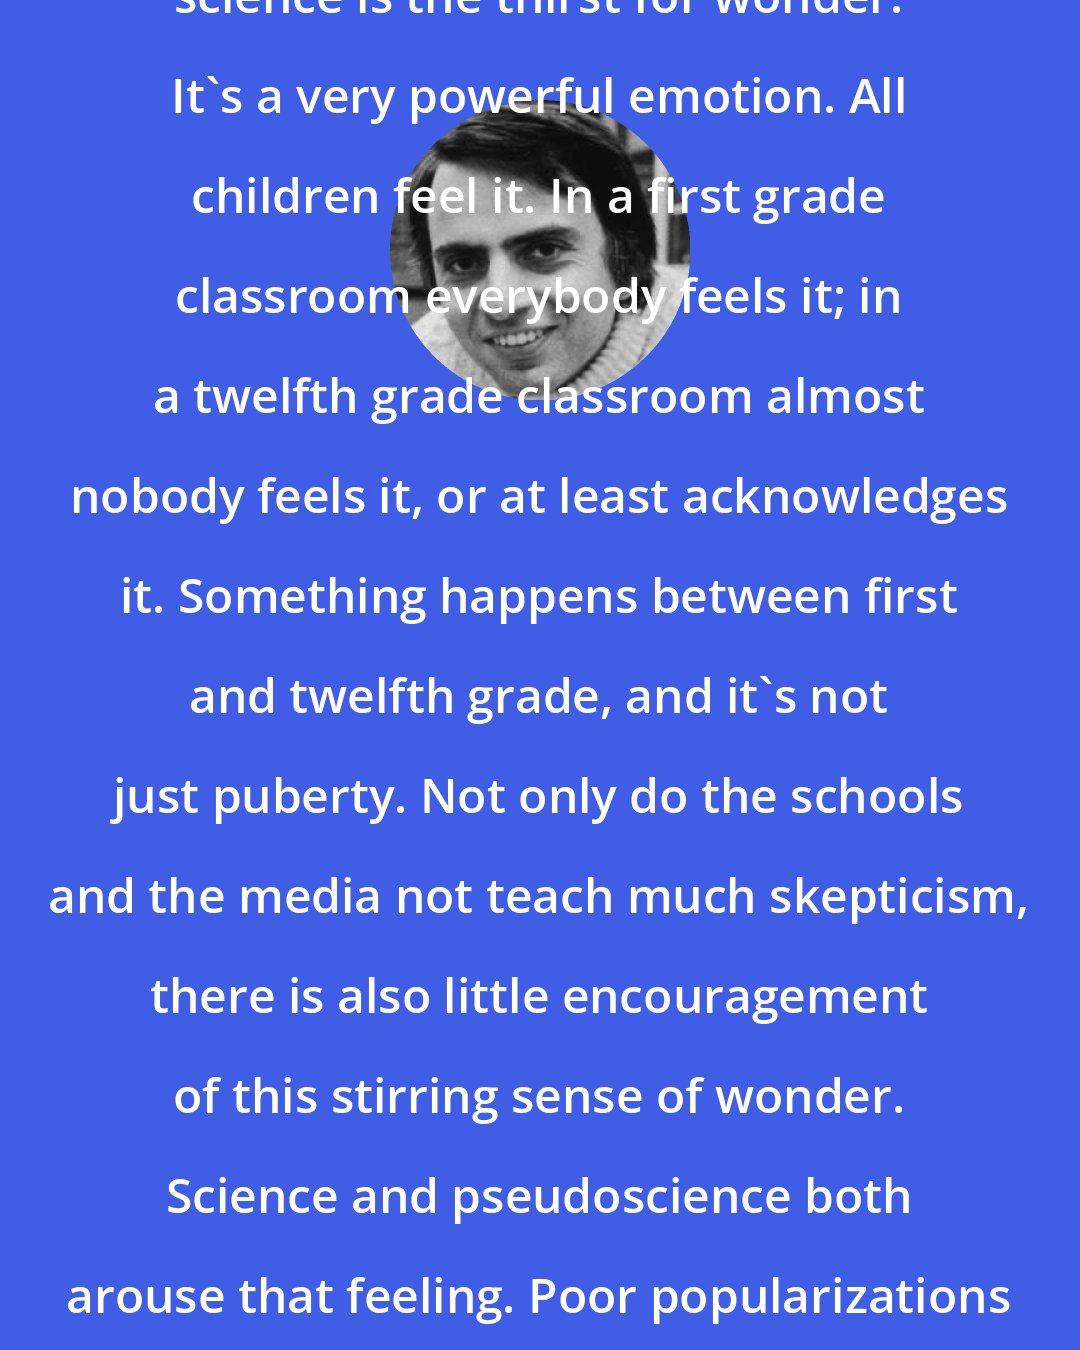 Carl Sagan: I believe that part of what propels science is the thirst for wonder. It's a very powerful emotion. All children feel it. In a first grade classroom everybody feels it; in a twelfth grade classroom almost nobody feels it, or at least acknowledges it. Something happens between first and twelfth grade, and it's not just puberty. Not only do the schools and the media not teach much skepticism, there is also little encouragement of this stirring sense of wonder. Science and pseudoscience both arouse that feeling. Poor popularizations of science establish an ecological niche for pseudoscience.